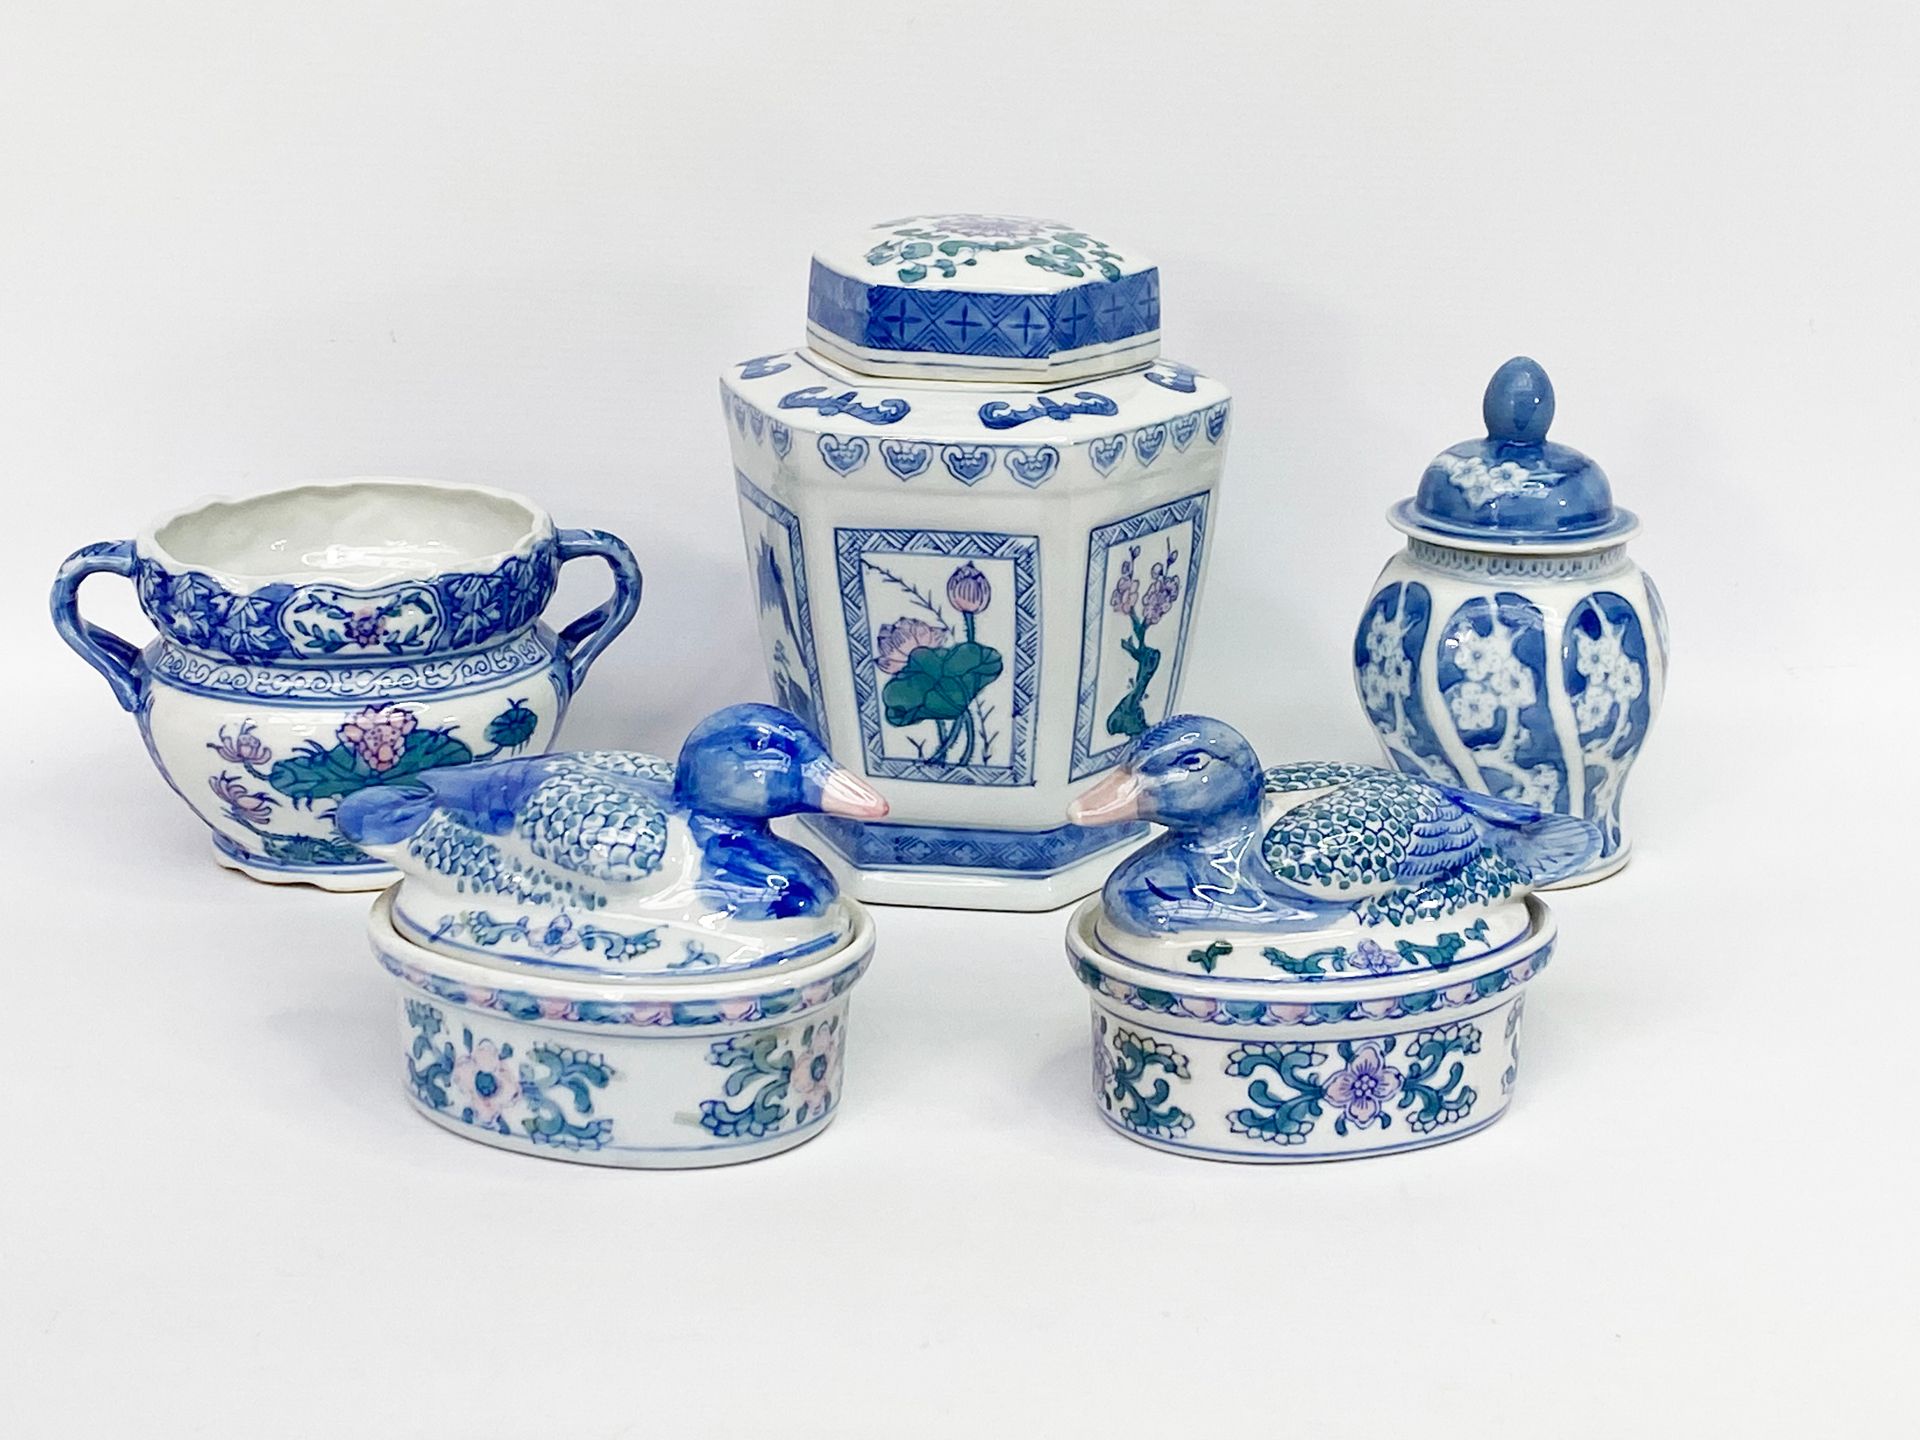 Null CHINA, 20th century 

Set in porcelain with polychrome decoration including&hellip;